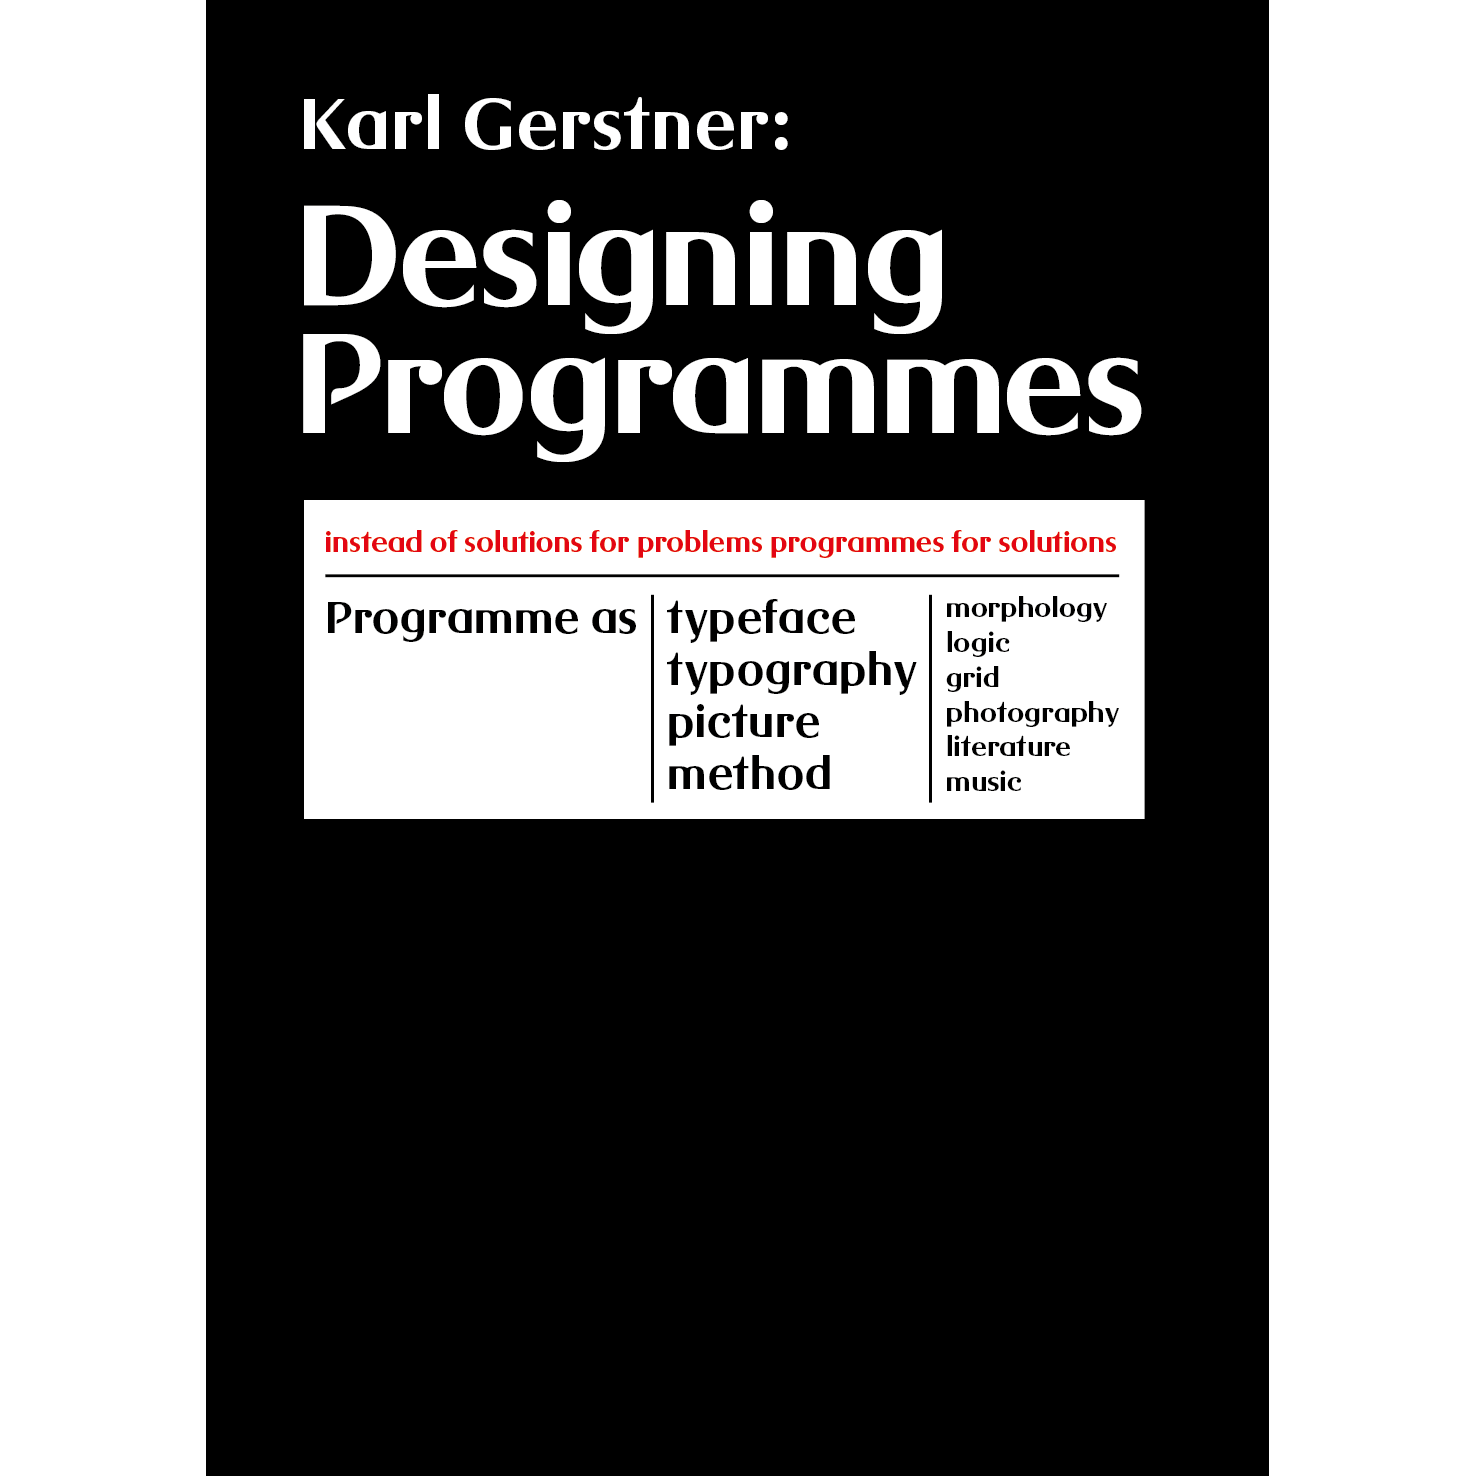 “Designing programmes” PDF for private use with quarterly donation